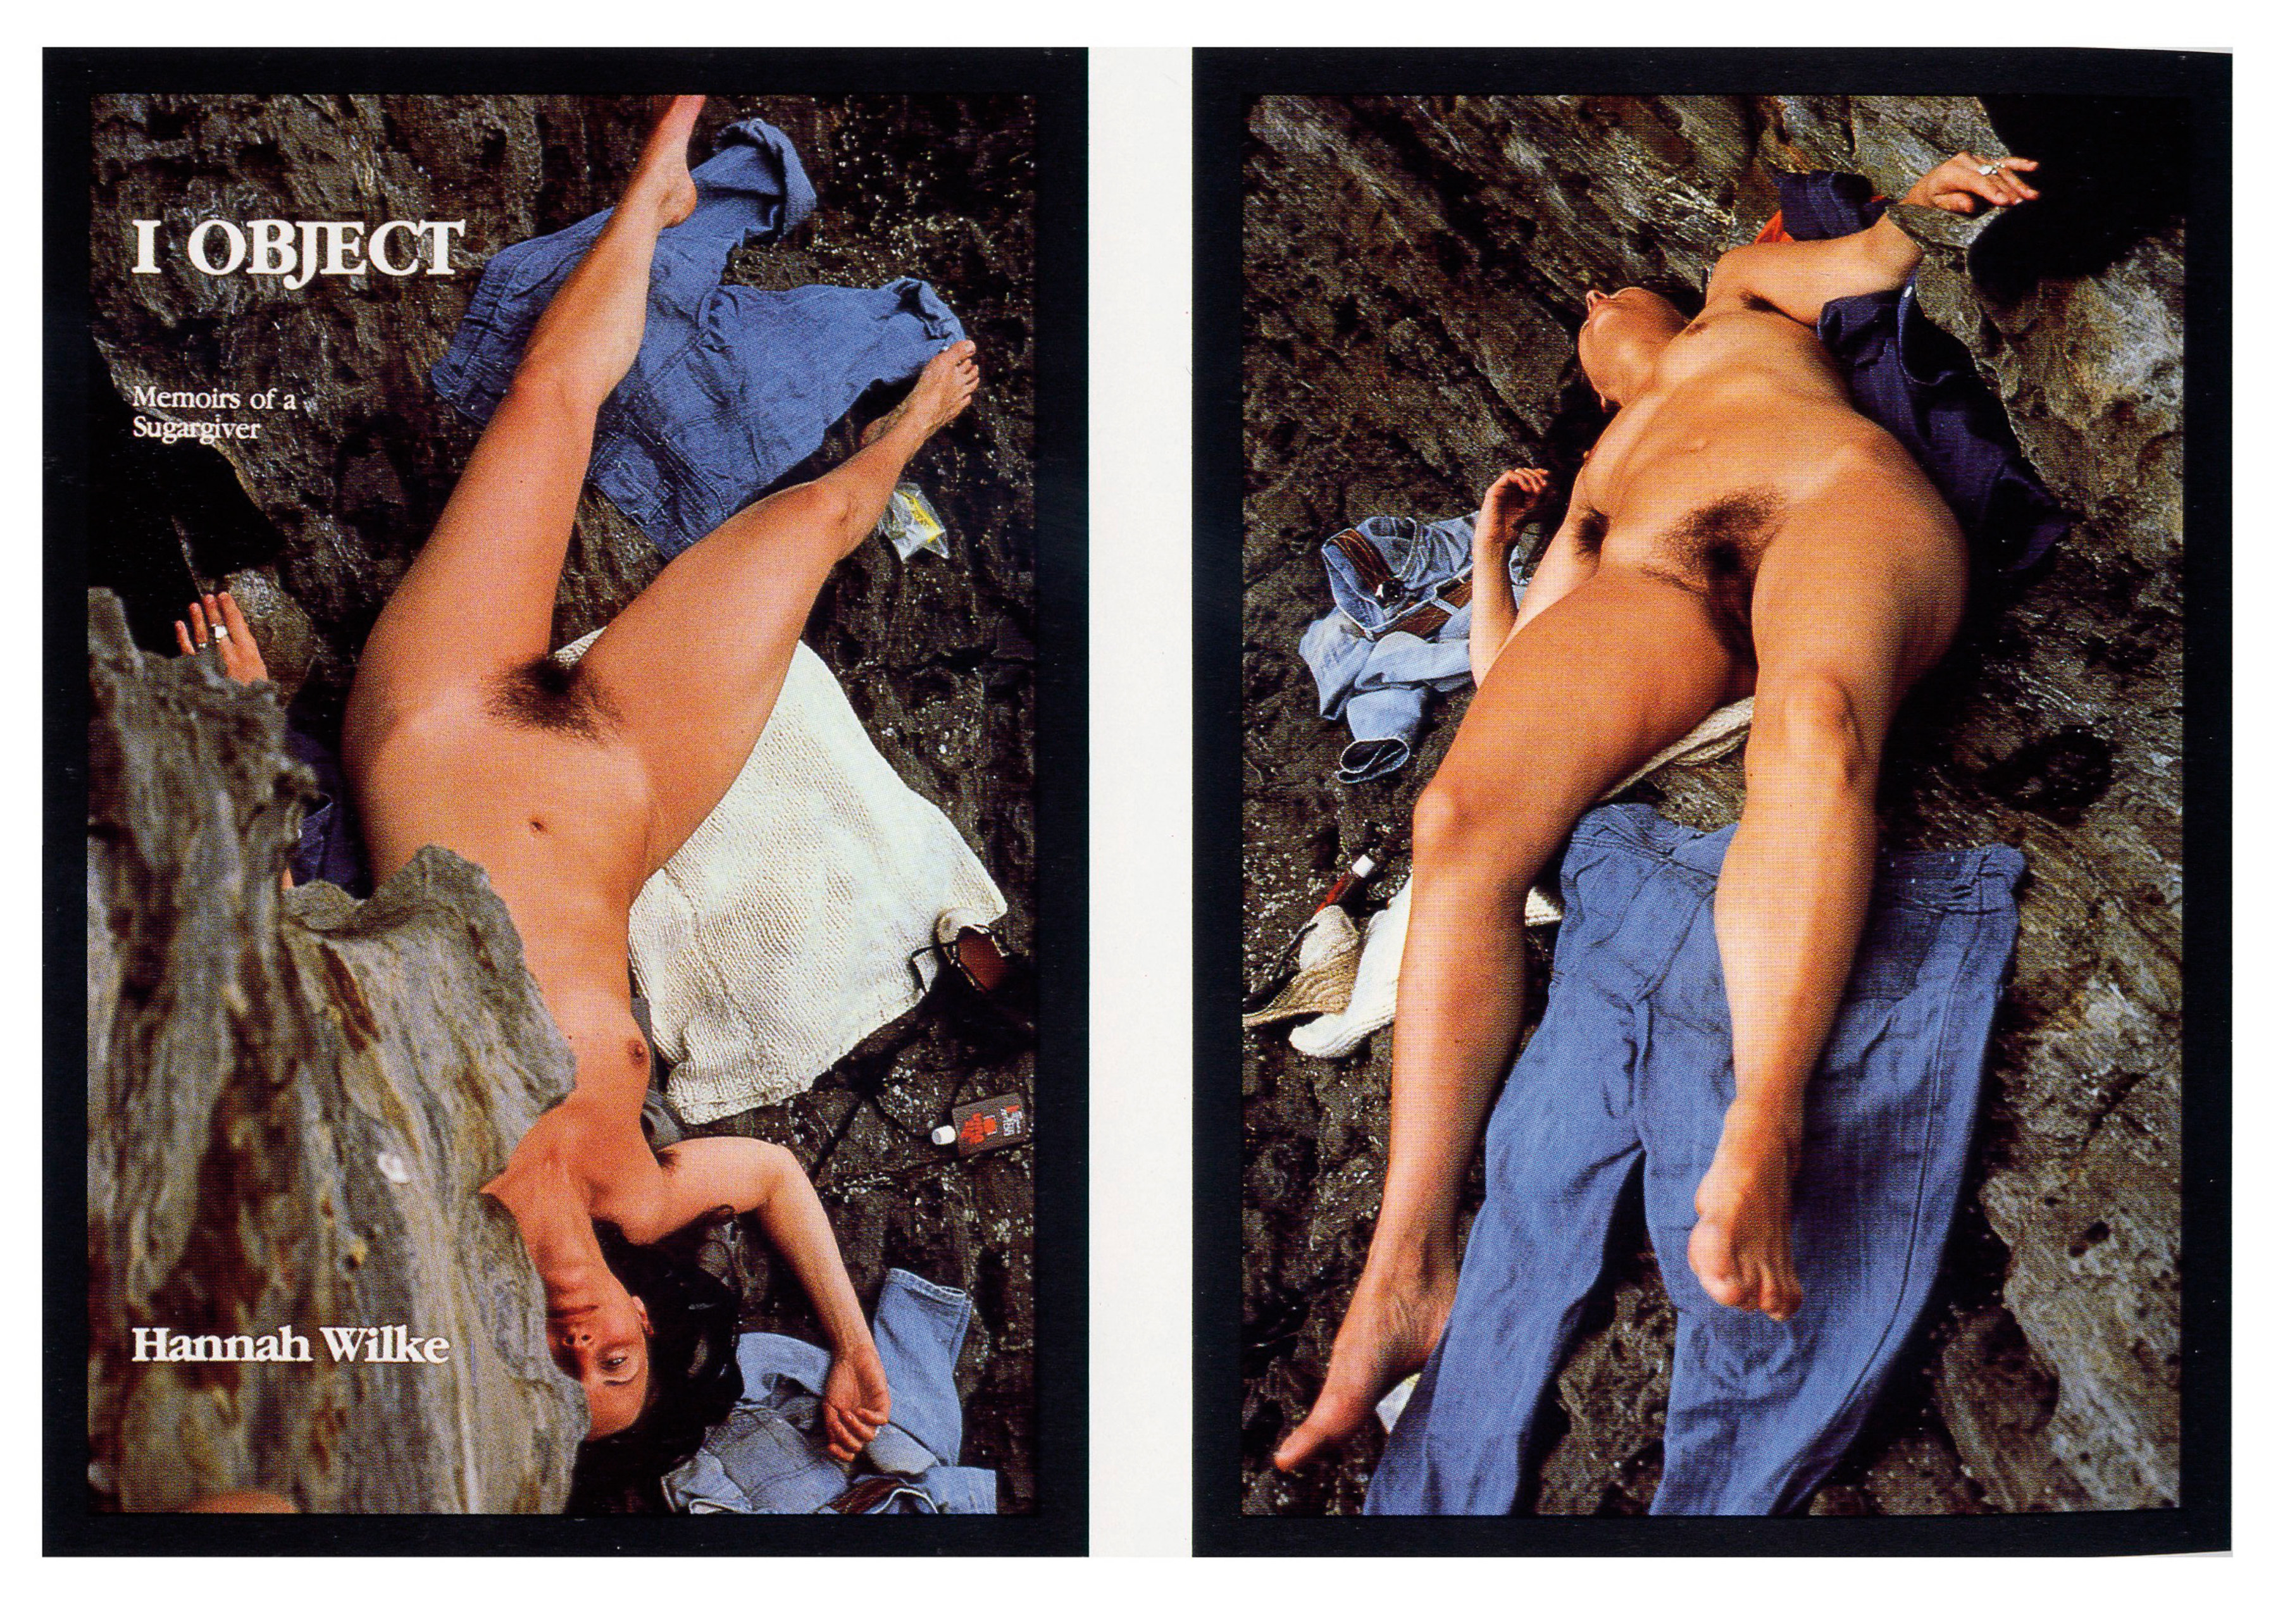 Hannah Wilke
I Object: Memoirs of a Sugargiver, 1977&amp;ndash;78
Cibachrome diptych
Each photograph: 24 &amp;times; 16 inches (61 &amp;times; 40.6 cm)
Performalist Self-Portraits with Richard Hamilton
Hannah Wilke Collection &amp;amp; Archive, Los Angeles.
Courtesy Alison Jacques, London.